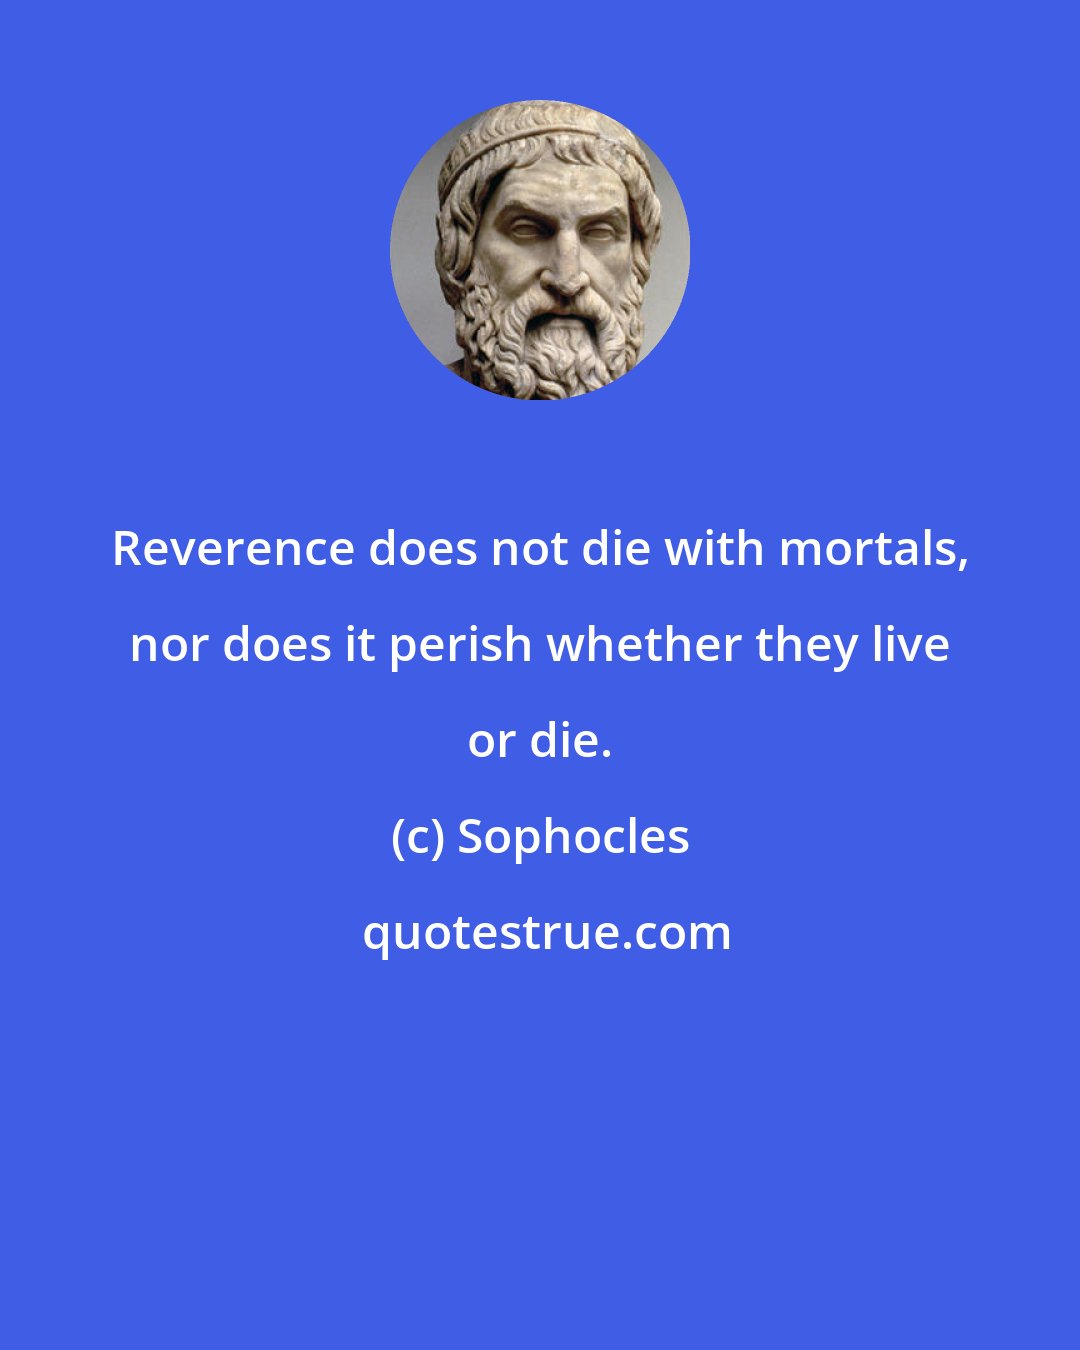 Sophocles: Reverence does not die with mortals, nor does it perish whether they live or die.